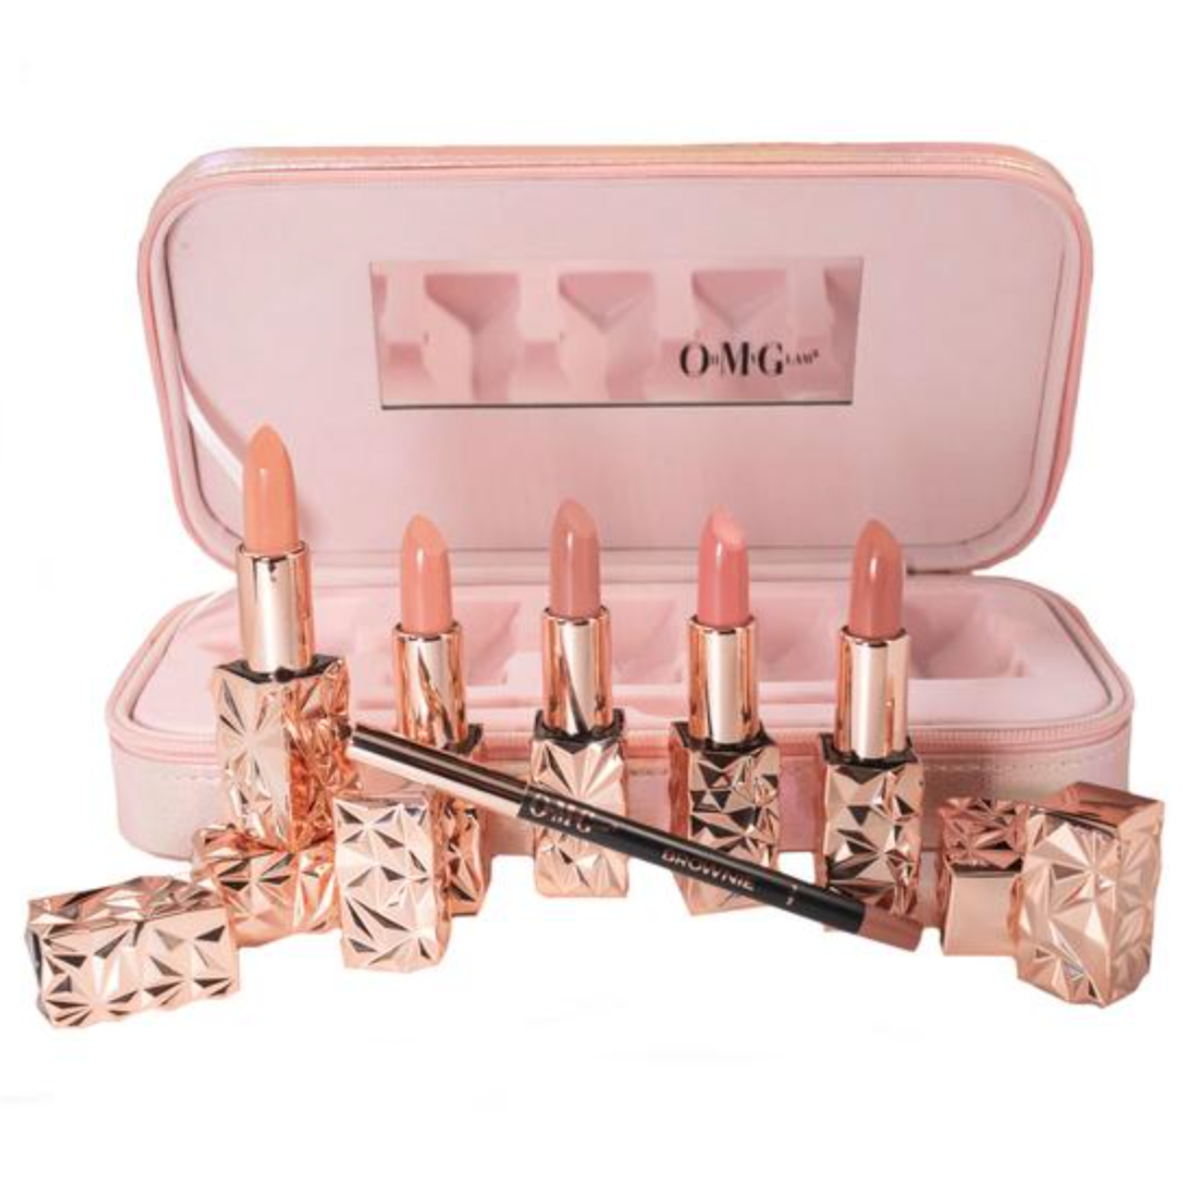 OH MY GLAM Obsessed Lipstick & Lip Liner Set